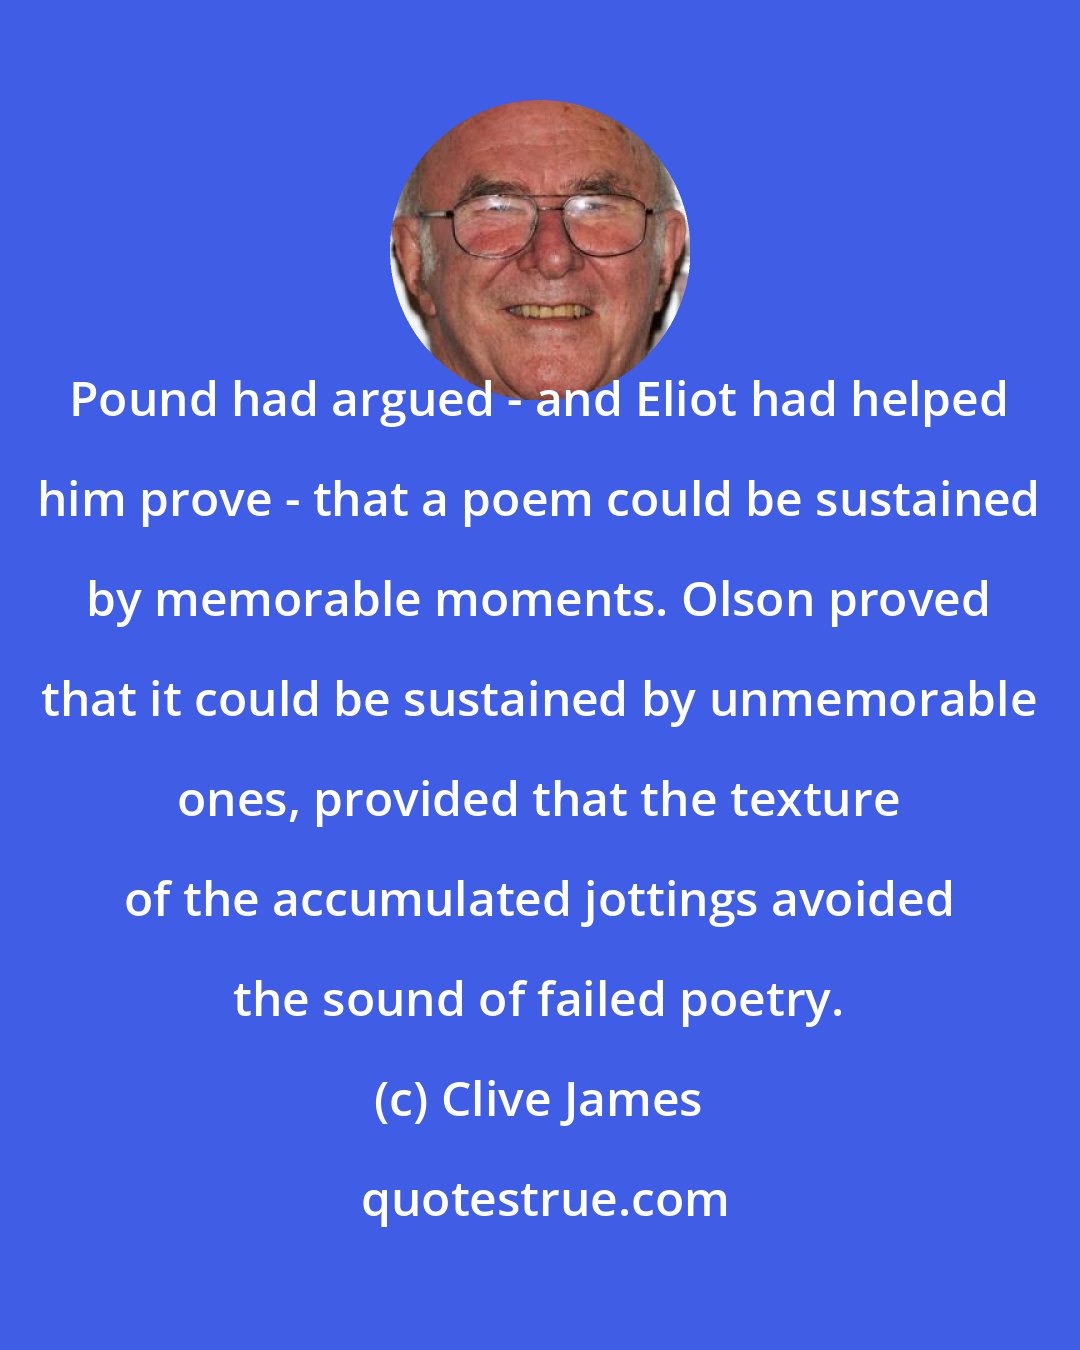 Clive James: Pound had argued - and Eliot had helped him prove - that a poem could be sustained by memorable moments. Olson proved that it could be sustained by unmemorable ones, provided that the texture of the accumulated jottings avoided the sound of failed poetry.